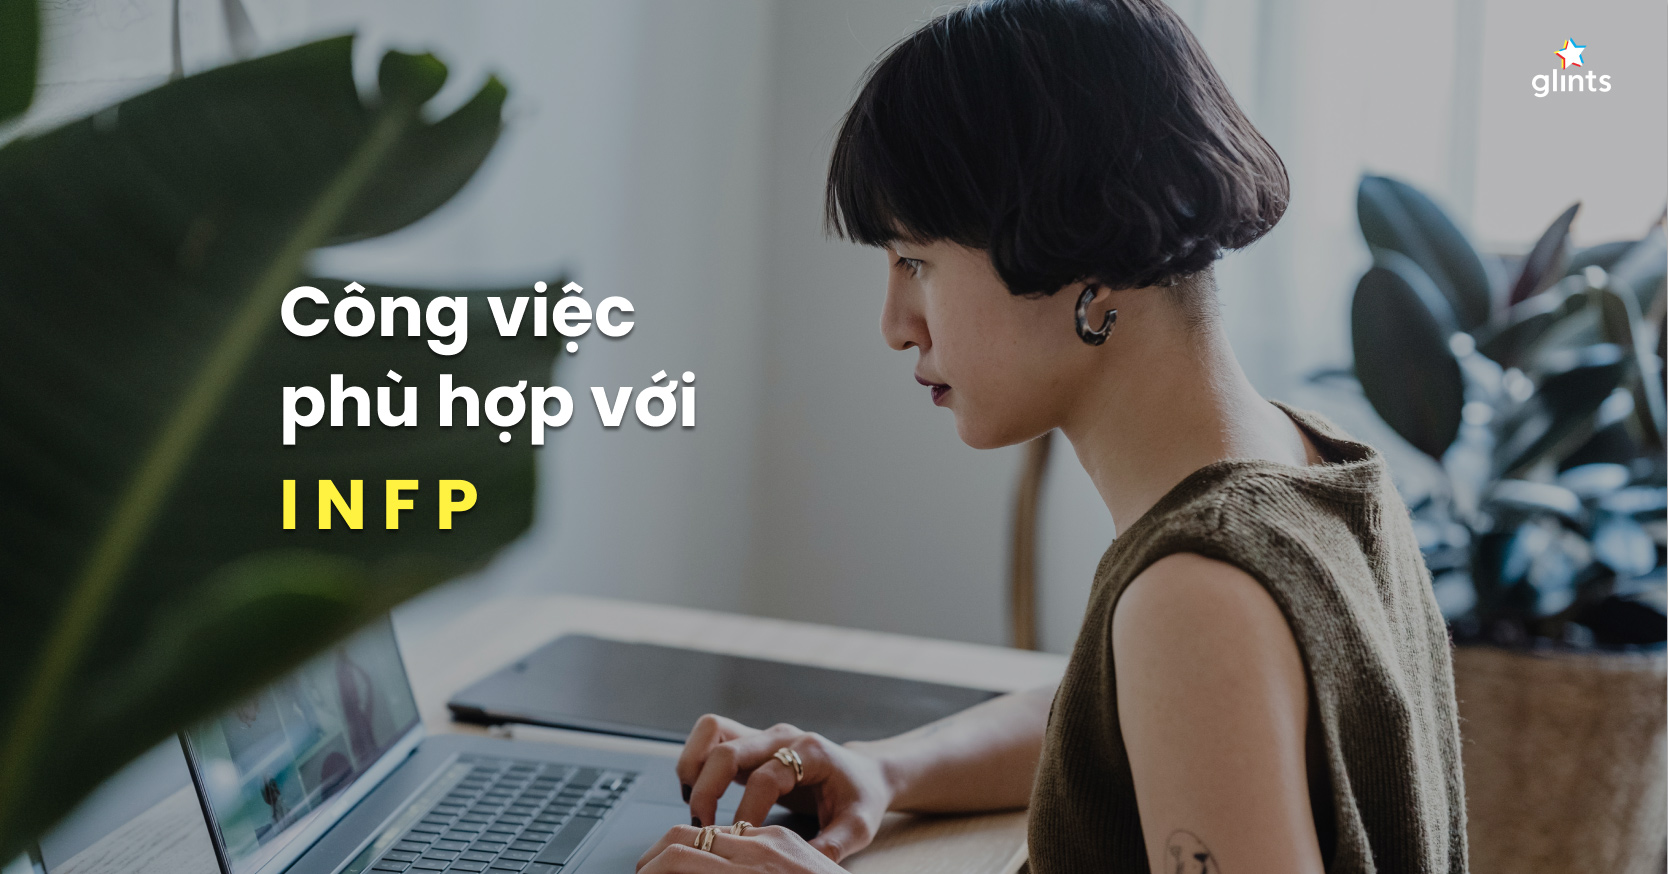 cong-viec-phu-hop-voi-infp